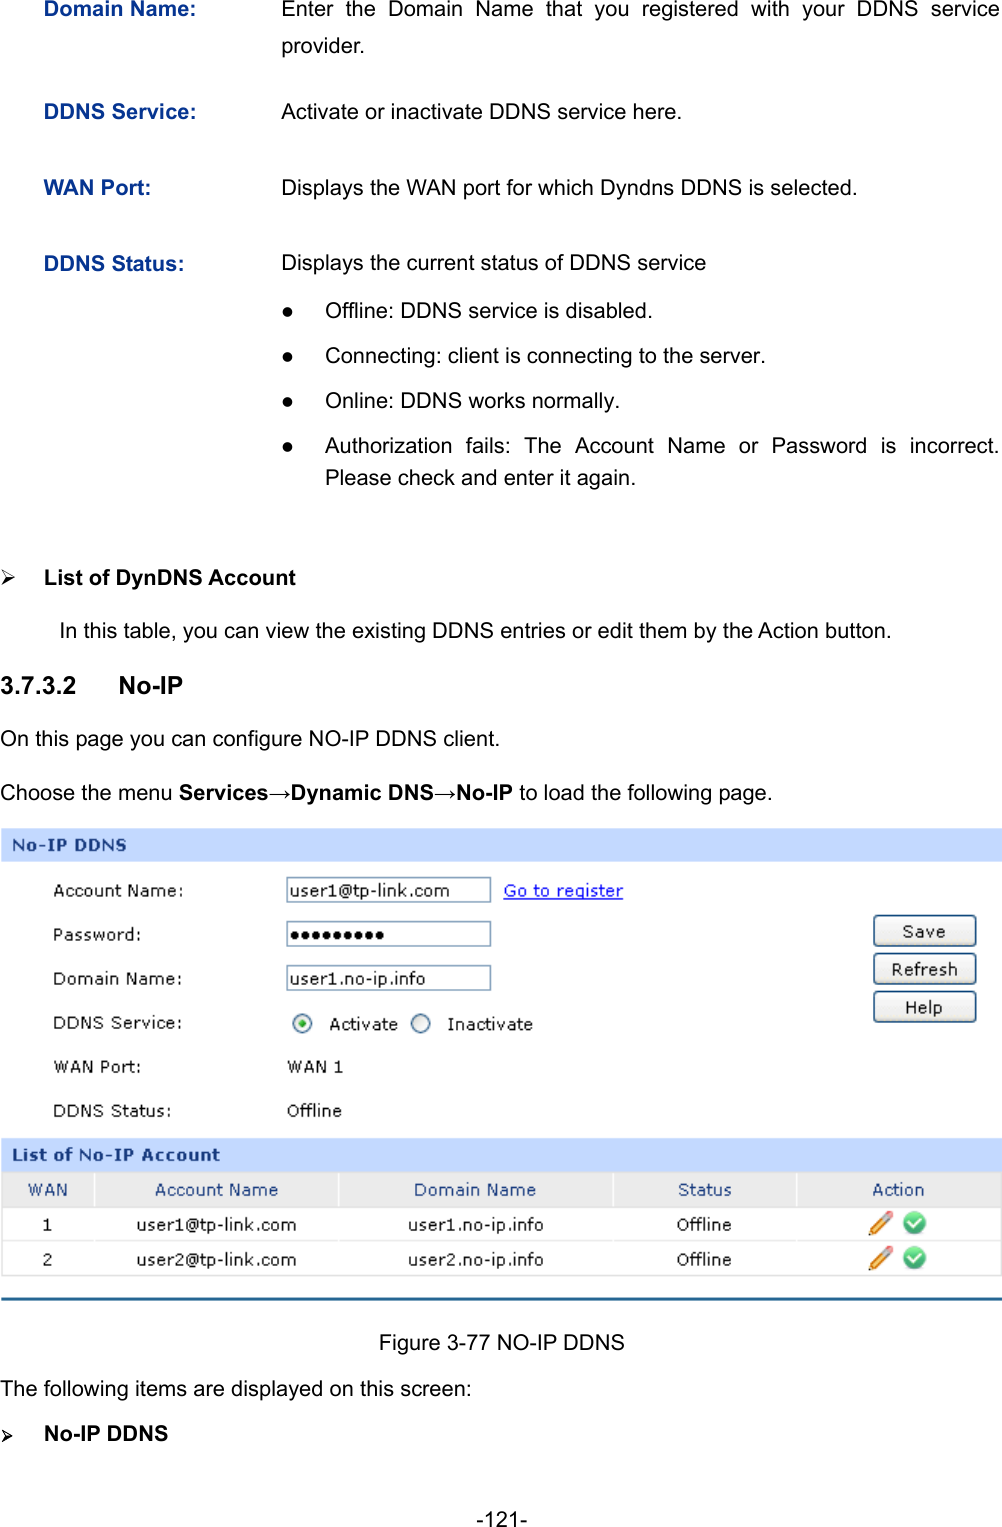  -121- 3.7.3.2 Domain Name:  Enter the Domain Name that you registered with your DDNS service provider. DDNS Service:  Activate or inactivate DDNS service here. WAN Port:  Displays the WAN port for which Dyndns DDNS is selected. DDNS Status:  Displays the current status of DDNS service z Offline: DDNS service is disabled. z Connecting: client is connecting to the server. z Online: DDNS works normally. z Authorization fails: The Account Name or Password is incorrect. Please check and enter it again. ¾ List of DynDNS Account In this table, you can view the existing DDNS entries or edit them by the Action button. No-IP On this page you can configure NO-IP DDNS client. Choose the menu Services→Dynamic DNS→No-IP to load the following page.  Figure 3-77 NO-IP DDNS The following items are displayed on this screen: ¾ No-IP DDNS 